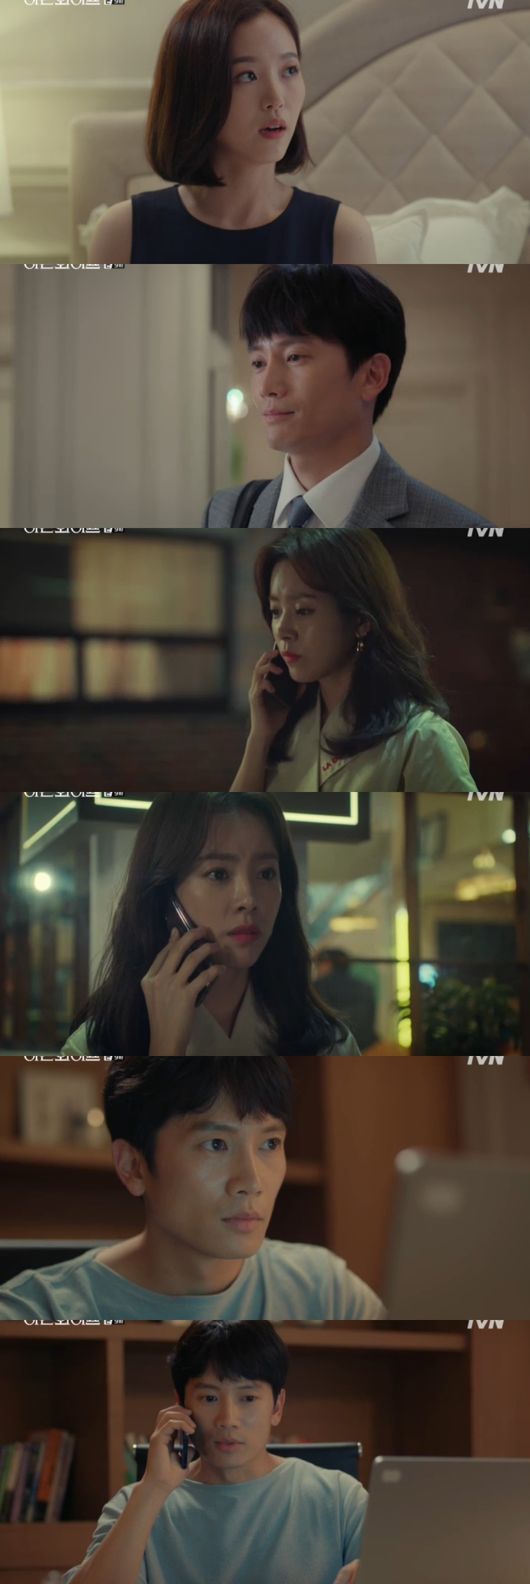 In Knowing Wife, Han Ji-min and Ji Sung found out that the slander writer was Kang Han-Na.In the TVN drama Ai is Wife (directed by Lee Sang-yeop, play by Yang Hee-seung) broadcast on the 29th, Woojin (Han Ji-min) and Ju Hyuk (Ji Sung) knew the atrocities of Hyewon (Kang Han-Na).An anonymous community of workers suddenly came up with a slander against Woojin.I am shocked by double life, beauty, bachelor, married man, moving to the point of mans problem, looking like you have changed your face, do not live like that.I came up with a picture of looking for Woojin. Woojin, who learned this, said, Why are people so rude?Then he went to the police station, saying he would not be quiet.While shopping with Hyun-soo, Hye-won called Ju-hyuk, who found out that Ju-hyuk had come to the police station for a slander case. Woojin asked for a cyber investigation team.Hye-won, surprised, headed to Hyun-soo and the PC room to delete the post. The police tracked the IP.When he returned home, he said he was sorry again, and Hyewon said, Do not make such a thing again.Woojin went to the restaurant of the state silver with the end of the day; while he was eating, Woojin received a call from the police, which said the author Identity had been revealed.Woojin was shocked to hear that the slander writer was Hyewon from the police, but Woojin was embarrassed, but decided to cancel the complaint because it was deleted anyway.At the same time, Joo Hyuk also checked the ID left as a laptop at home and then called the police station.I asked the author Identity, but the police said they could not tell except the complainant. Juhyuk checked the address and found it his home address.Police then contacted Woojin, but said they would not proceed with the complaint, and Juhyuk was surprised.Capture the broadcast screen of Knowing Wife